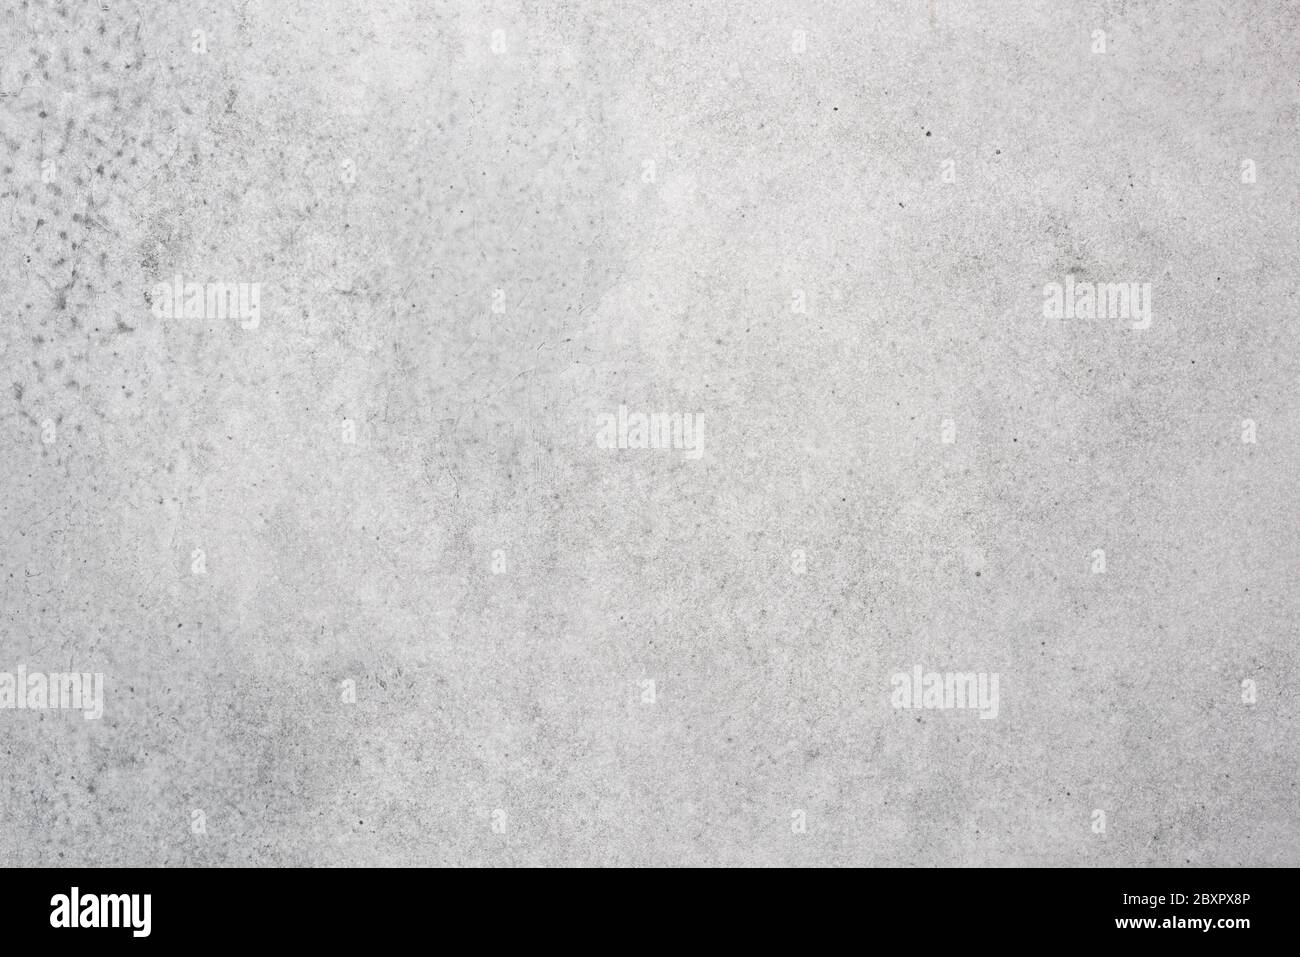 Gray Concrete Texture Background High Resolution, Horizontal Orientation, Copy Space For Text, Design Elements. Grey Cement Backdrop Stock Photo